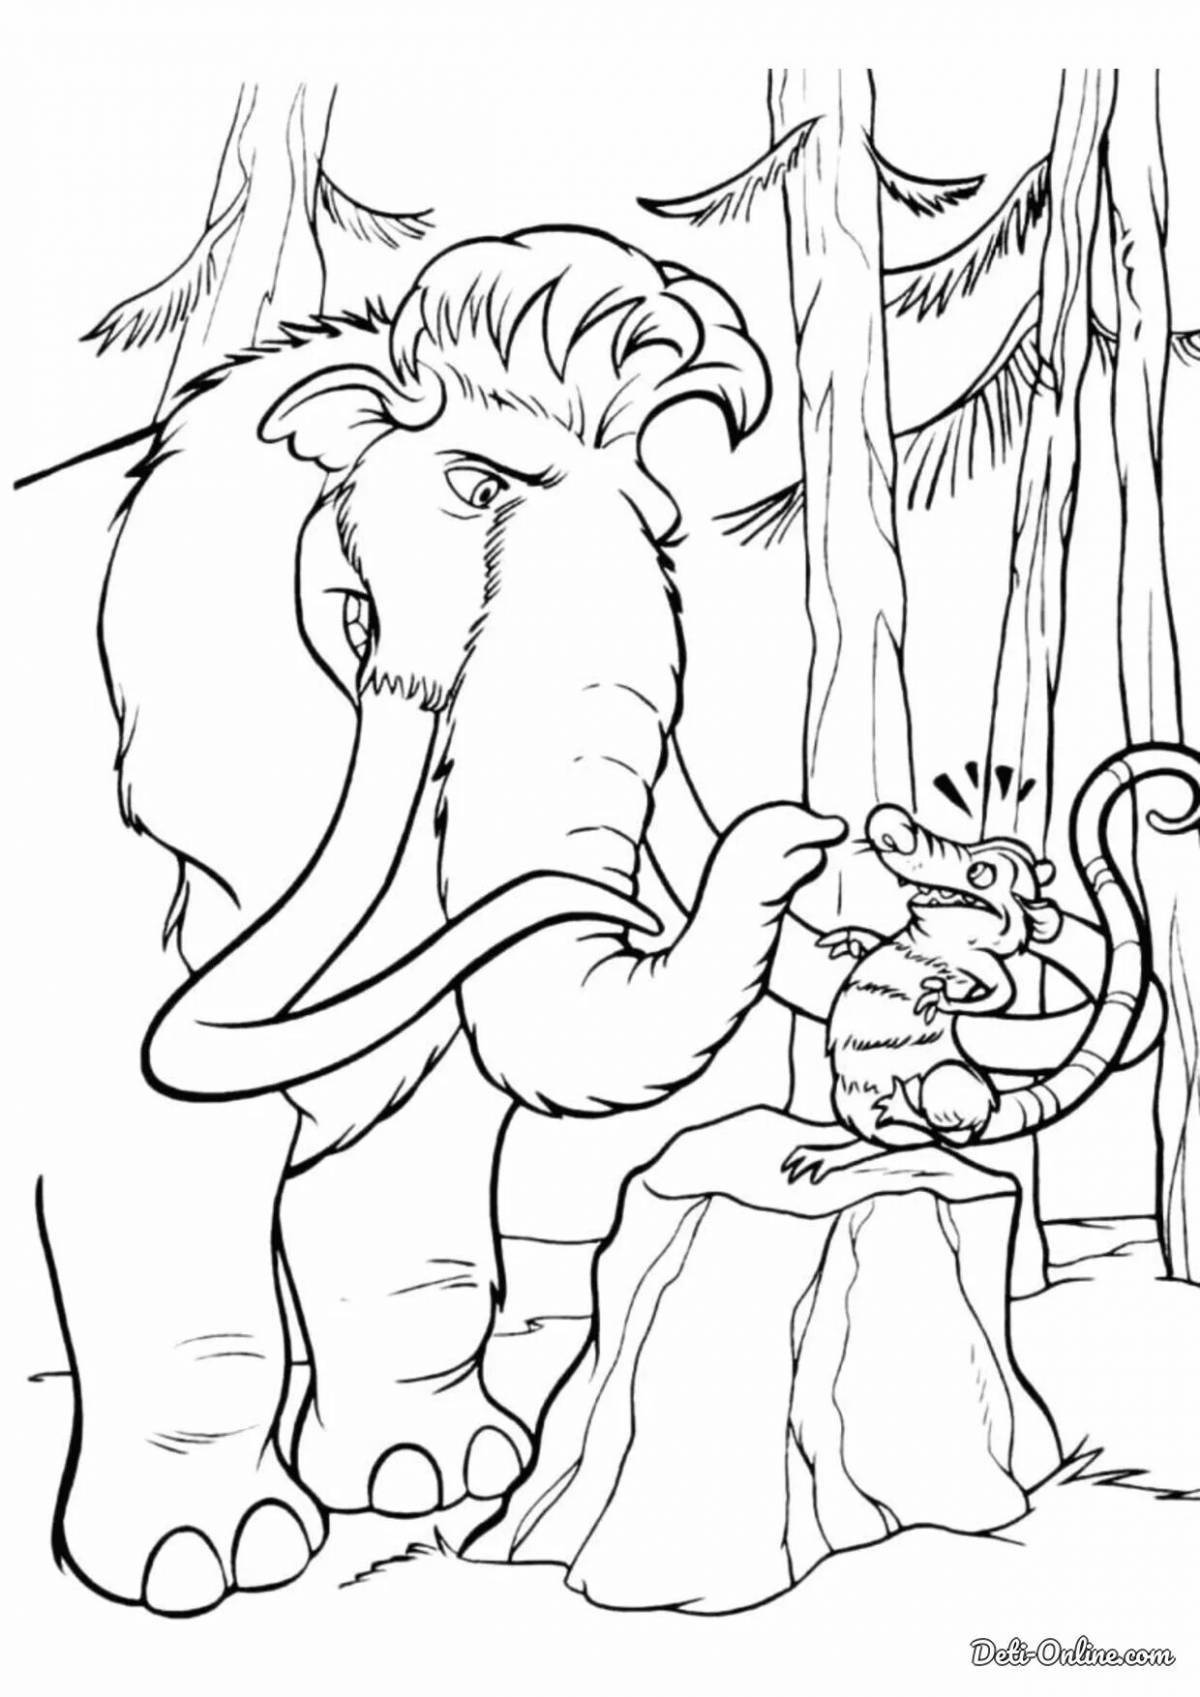 Incredible mammoth coloring book for kids